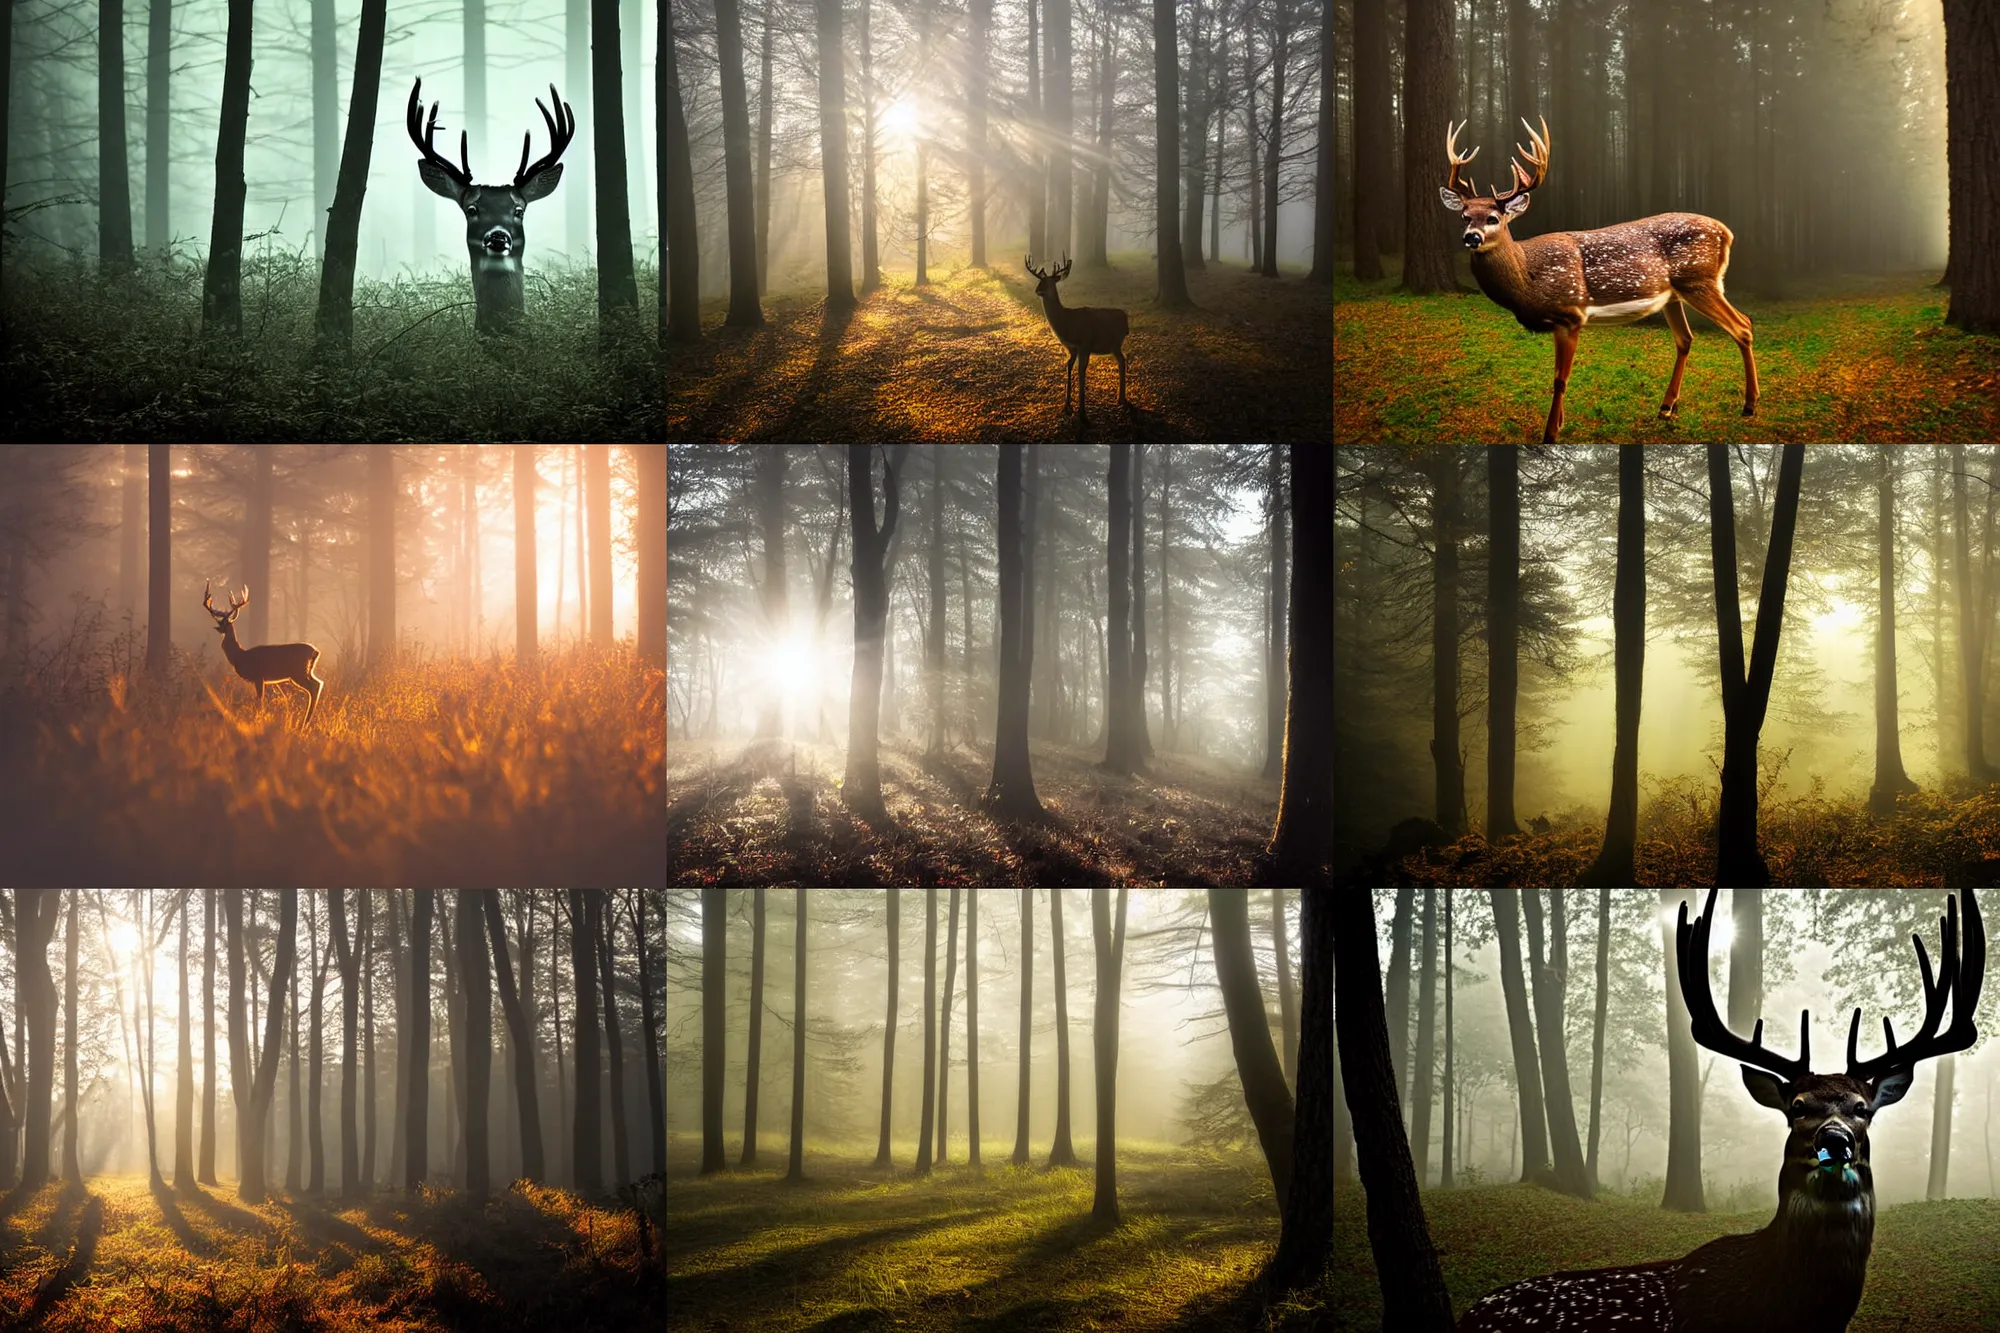 Prompt: shining eyes, a close up of the head of a deer, background of a landscape misty forest scene, the sun glistening through the trees